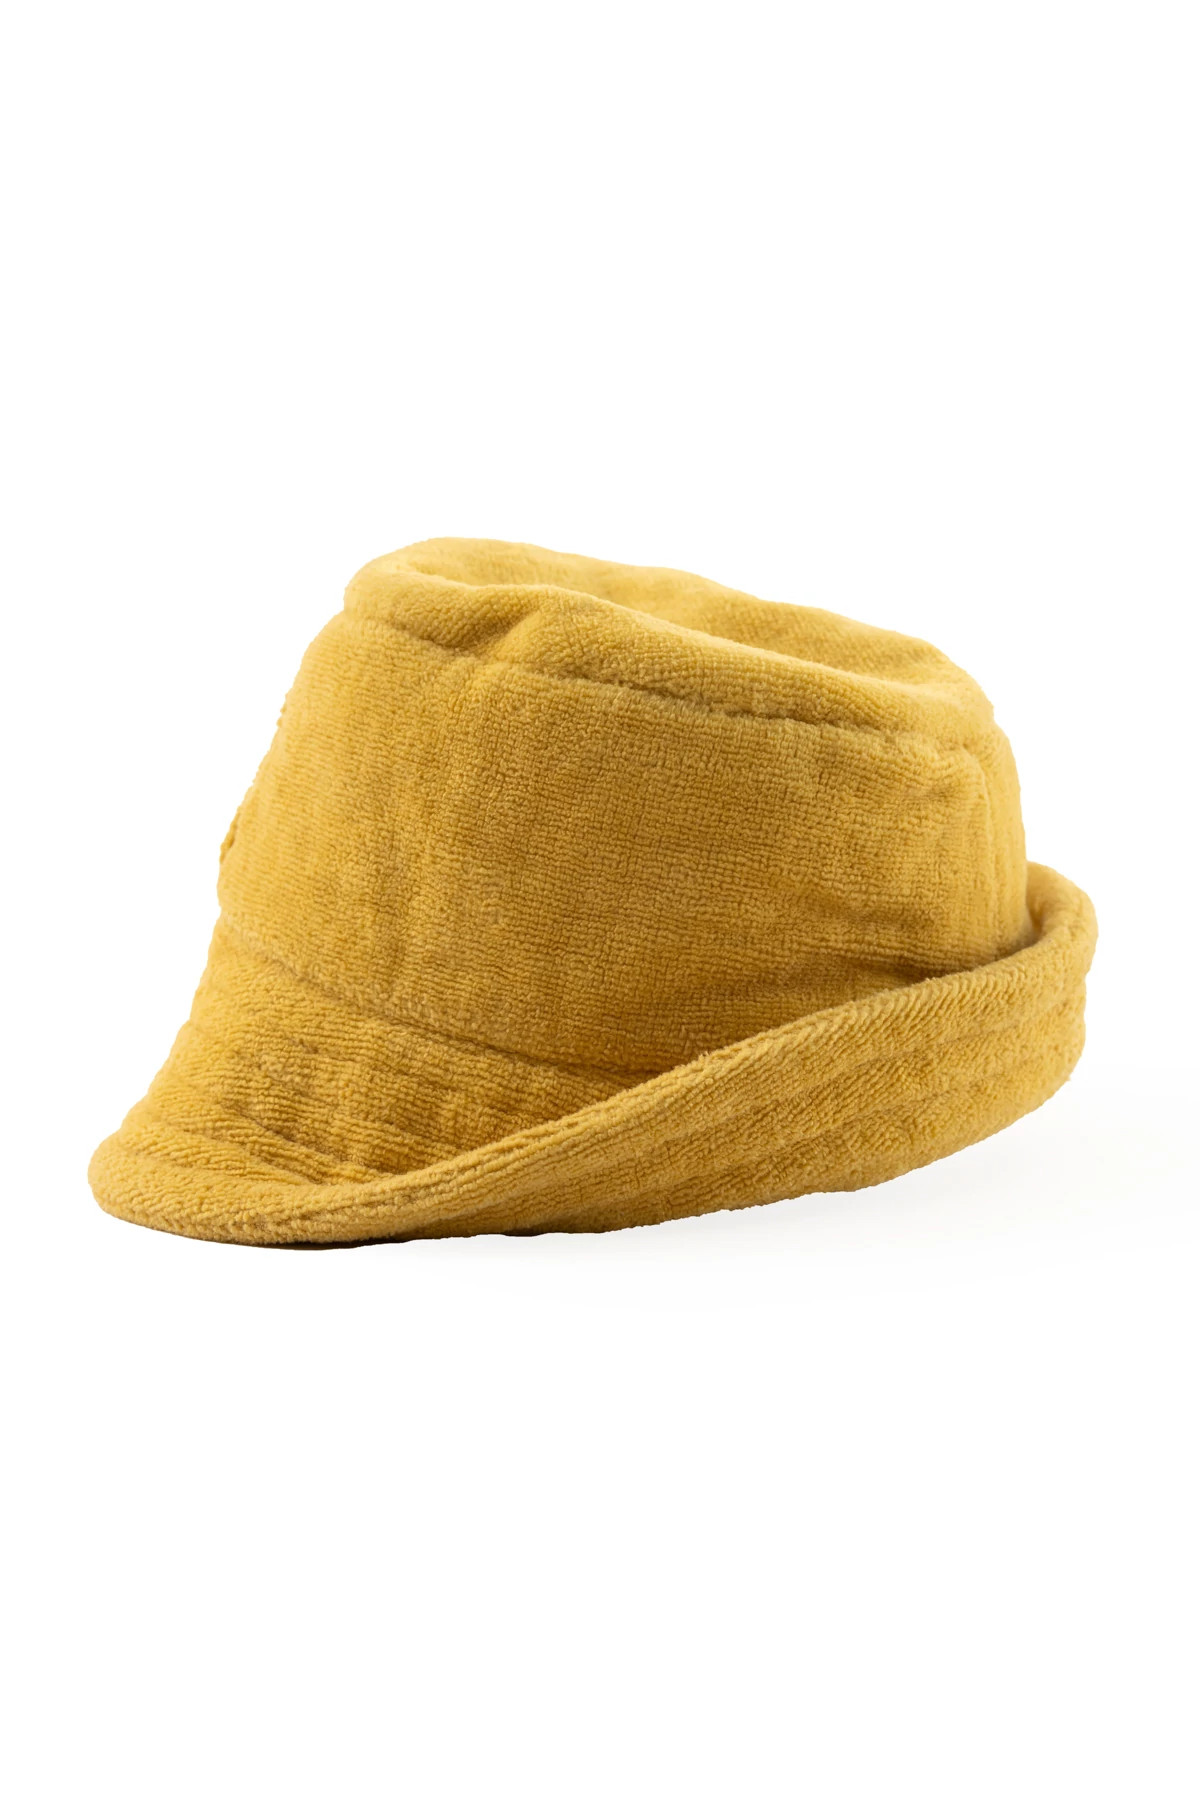 VINTAGE GOLD Terry Toweling Bucket Hat L/XL image number 2